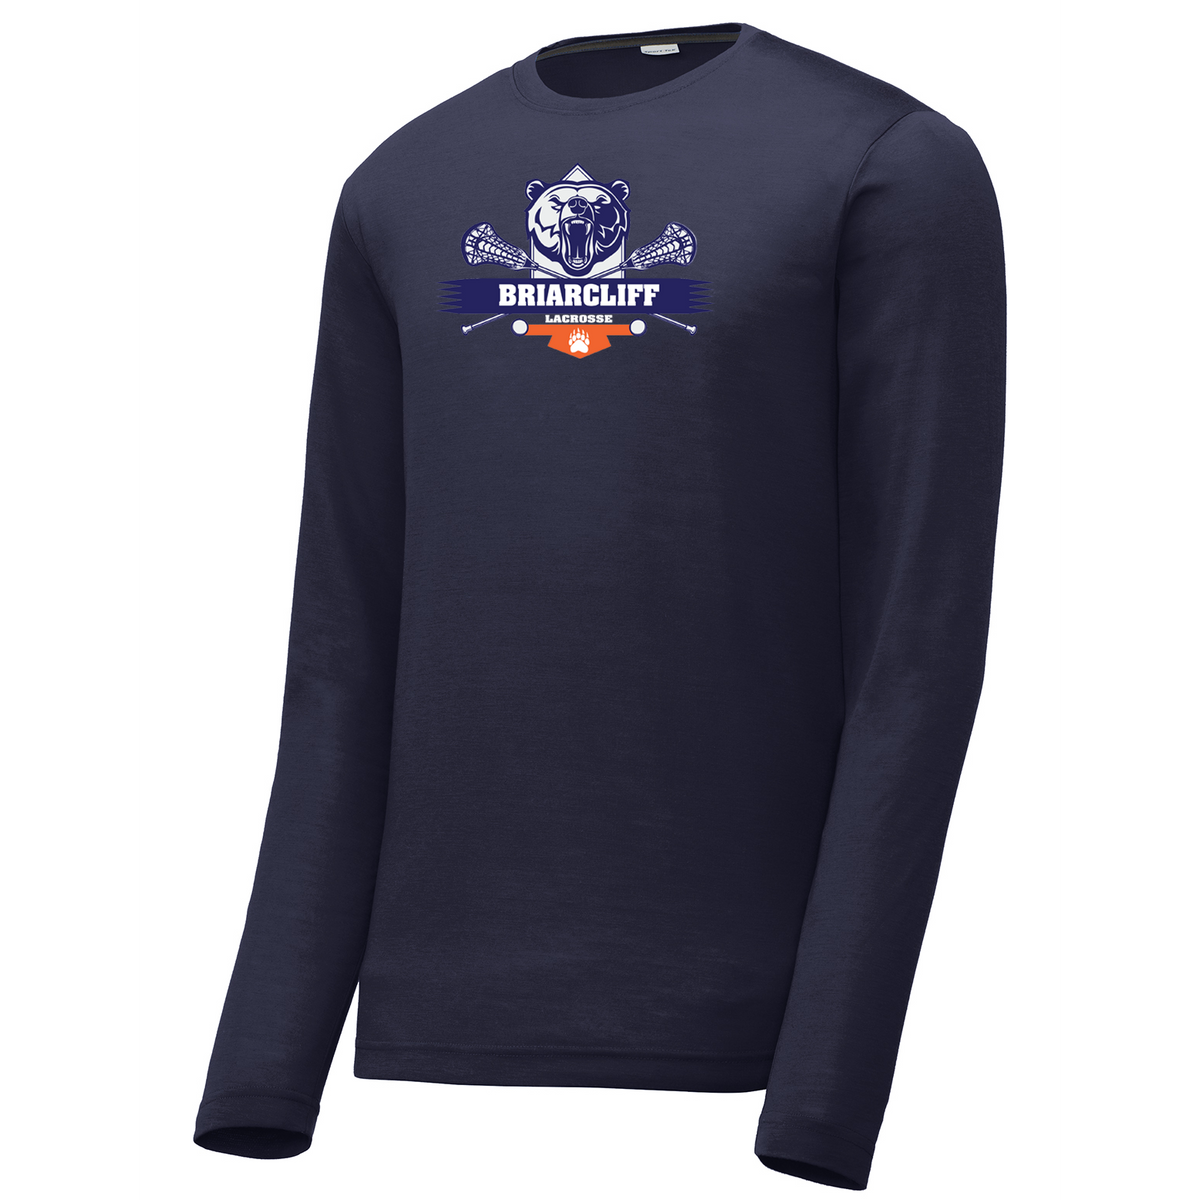 Briarcliff Lacrosse Navy Long Sleeve CottonTouch Performance Shirt